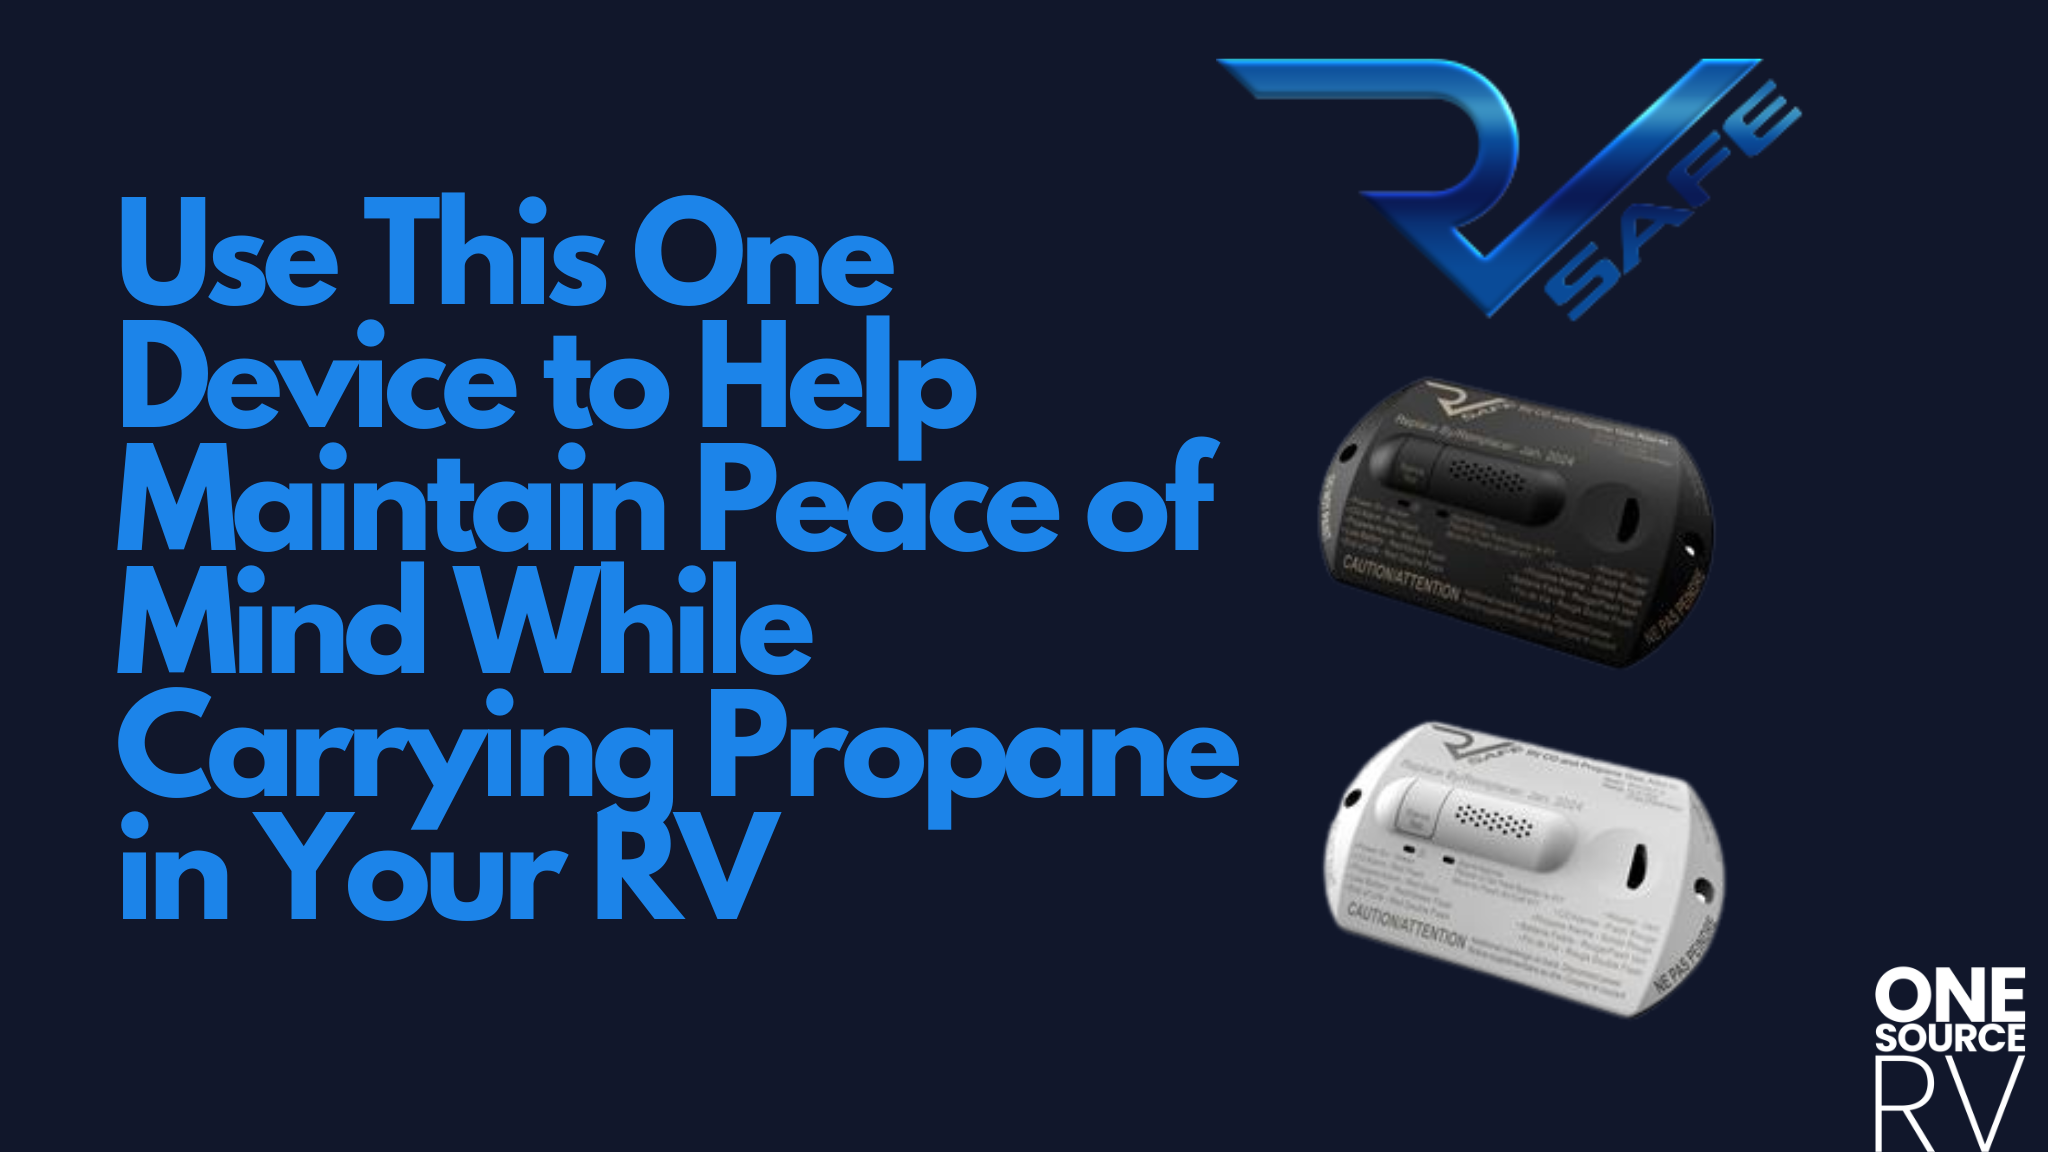 Use This One Device to Help Maintain Peace of Mind While Carrying Propane in Your RV